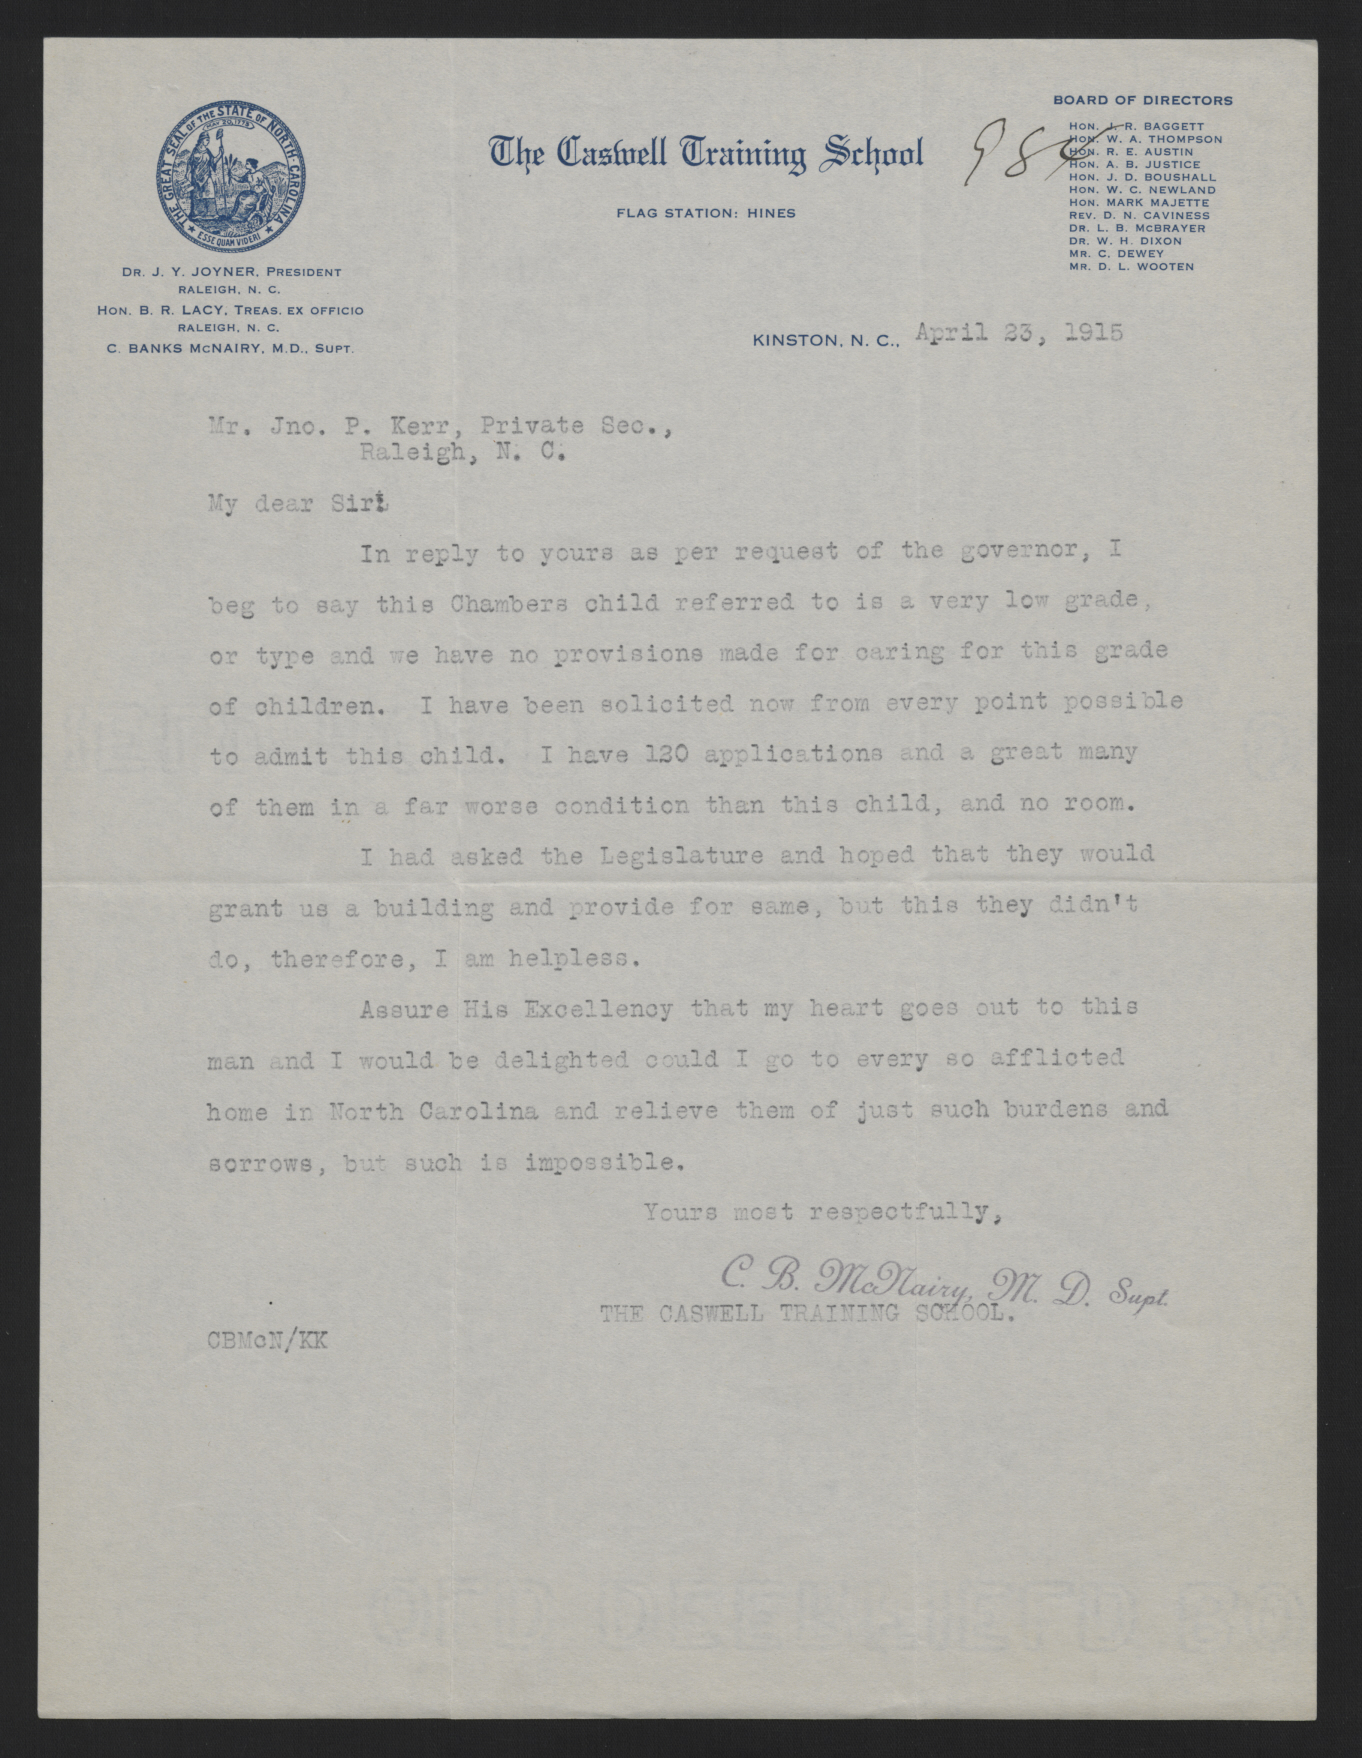 Letter from McNairy to Kerr, April 23, 1915